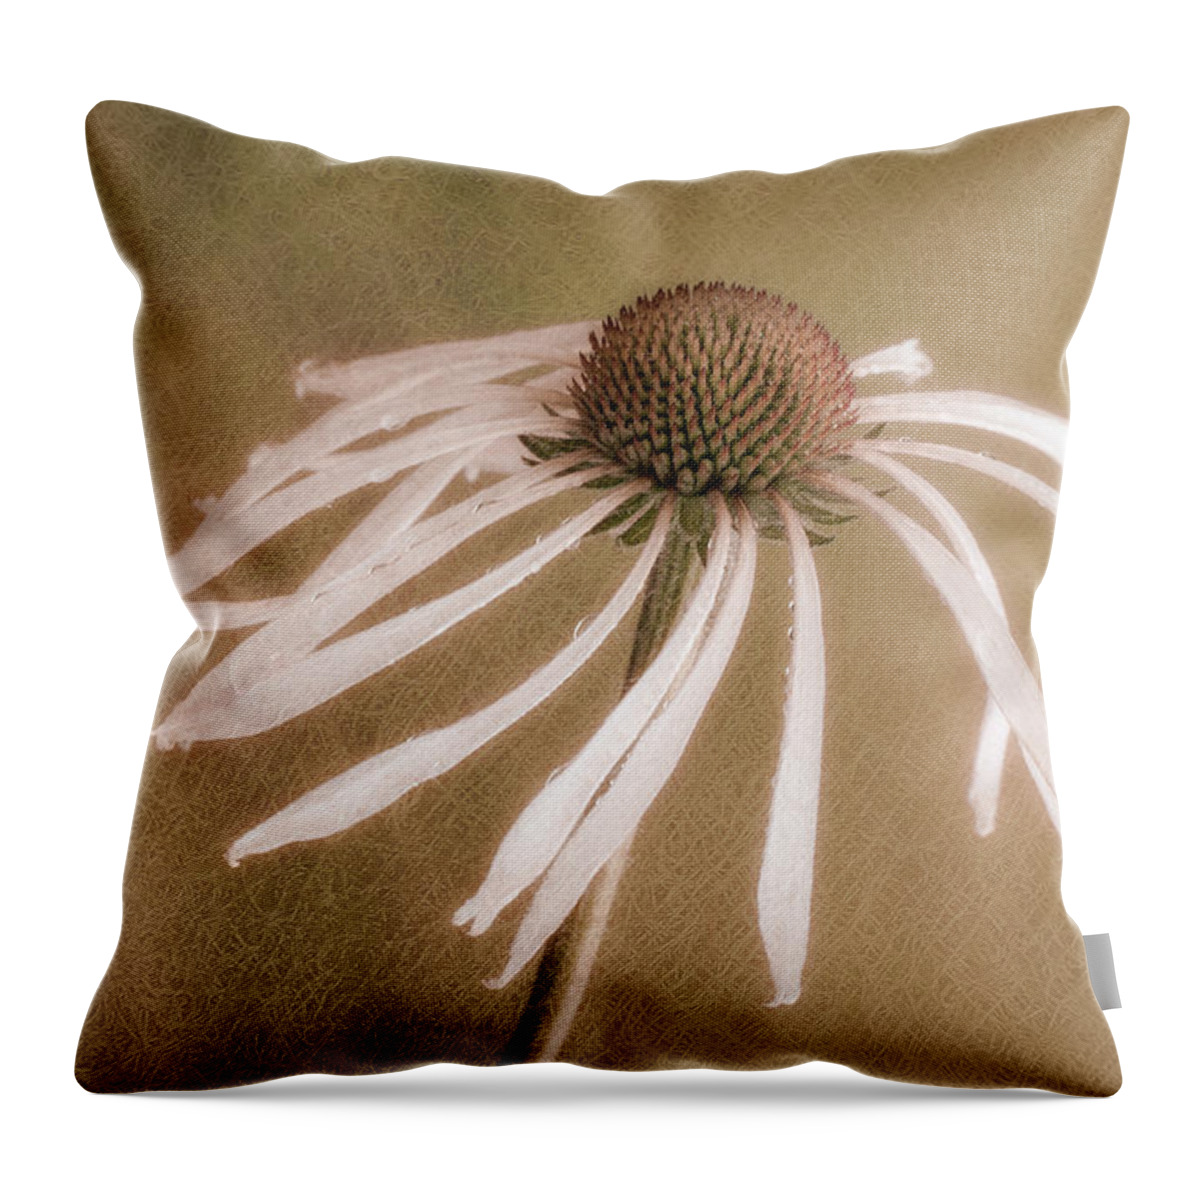 Coneflower Throw Pillow featuring the photograph Textured Coneflower by James Barber